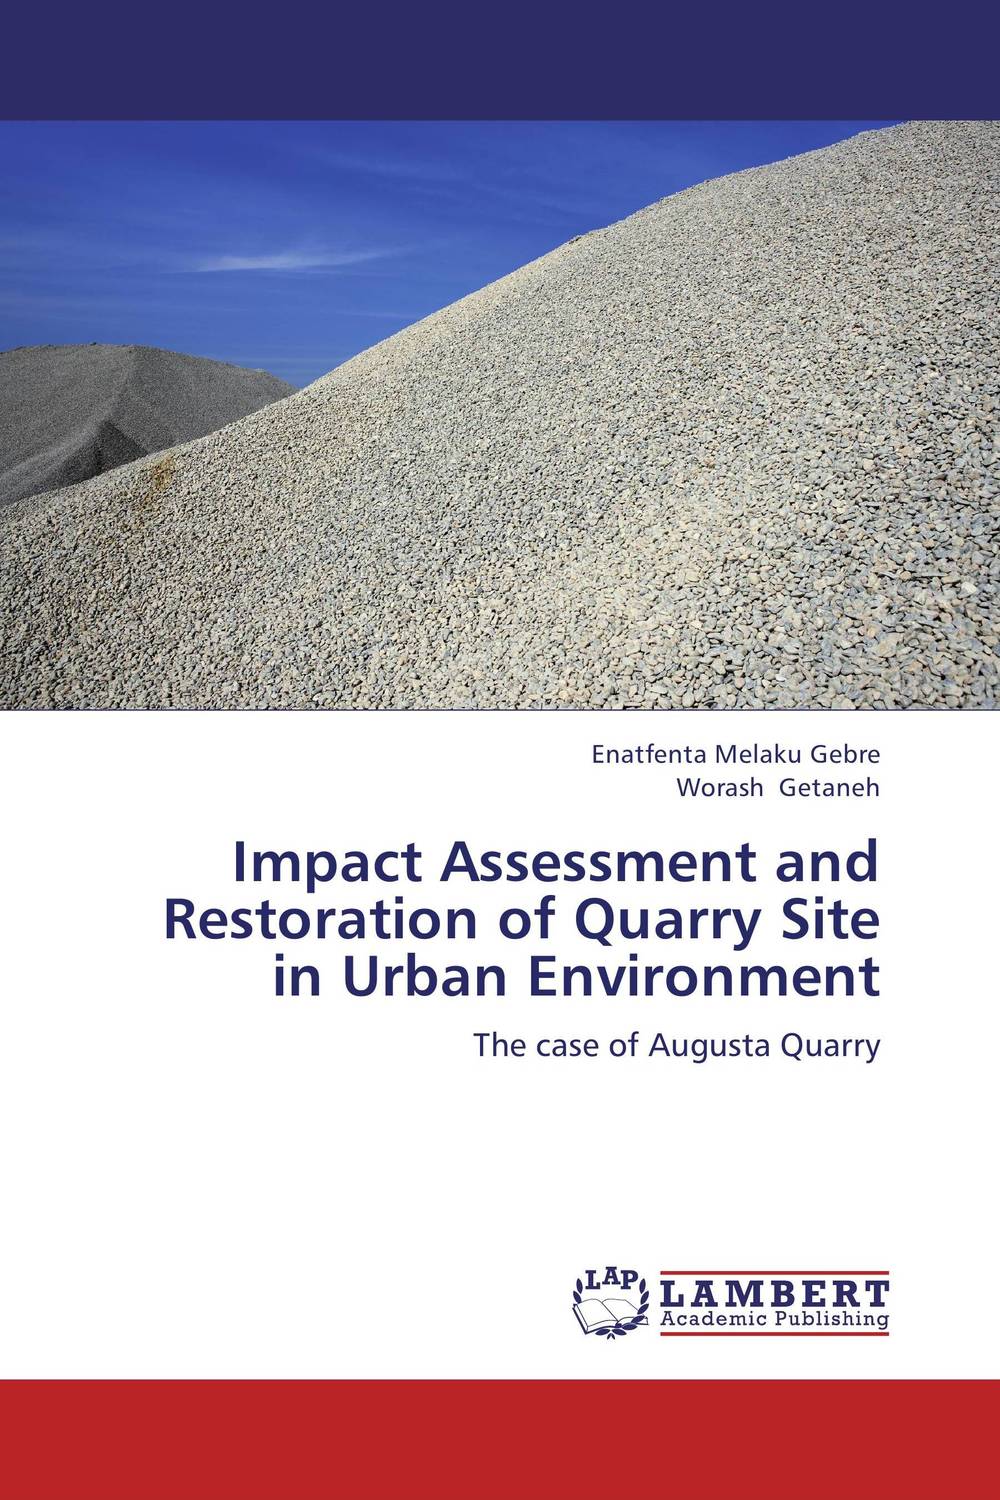 Impact Assessment and Restoration of Quarry Site in Urban Environment